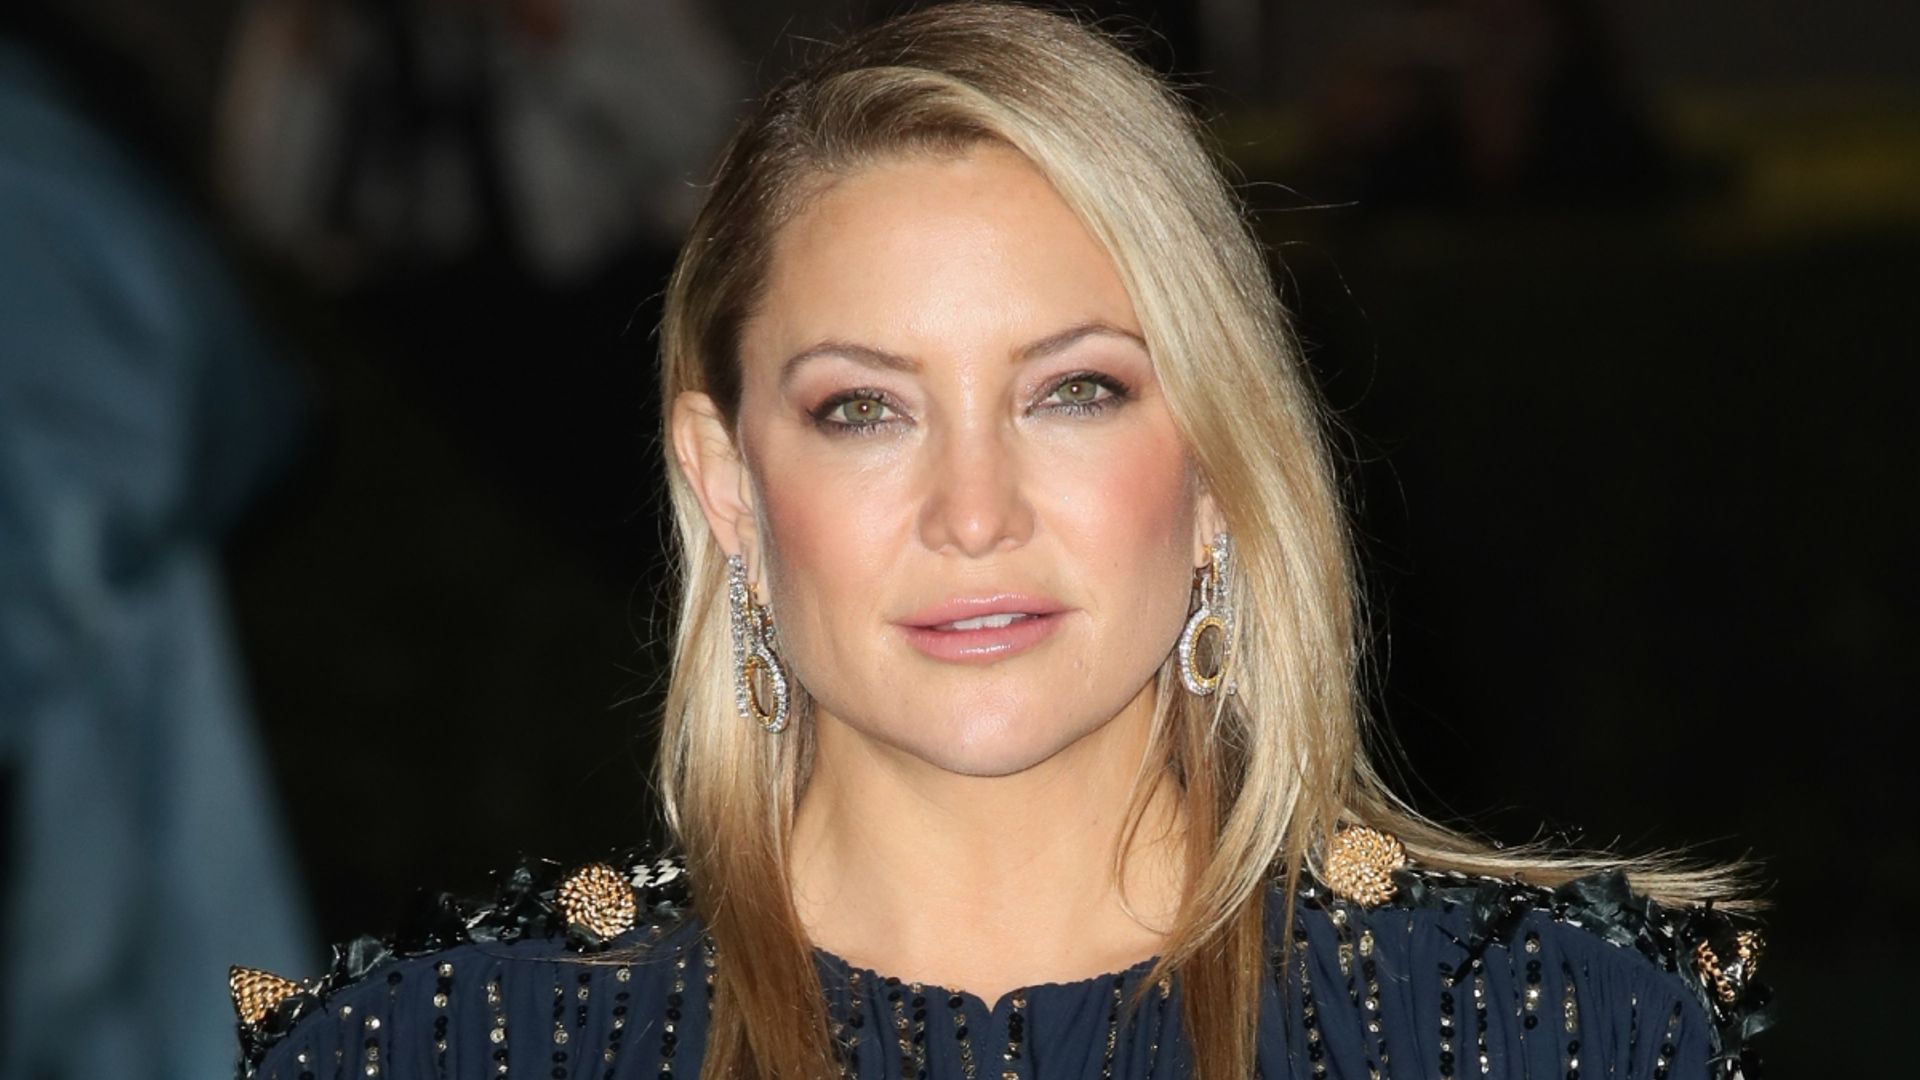 Kate Hudson gets fans talking as she poses in underwear and boots for an emotional cause